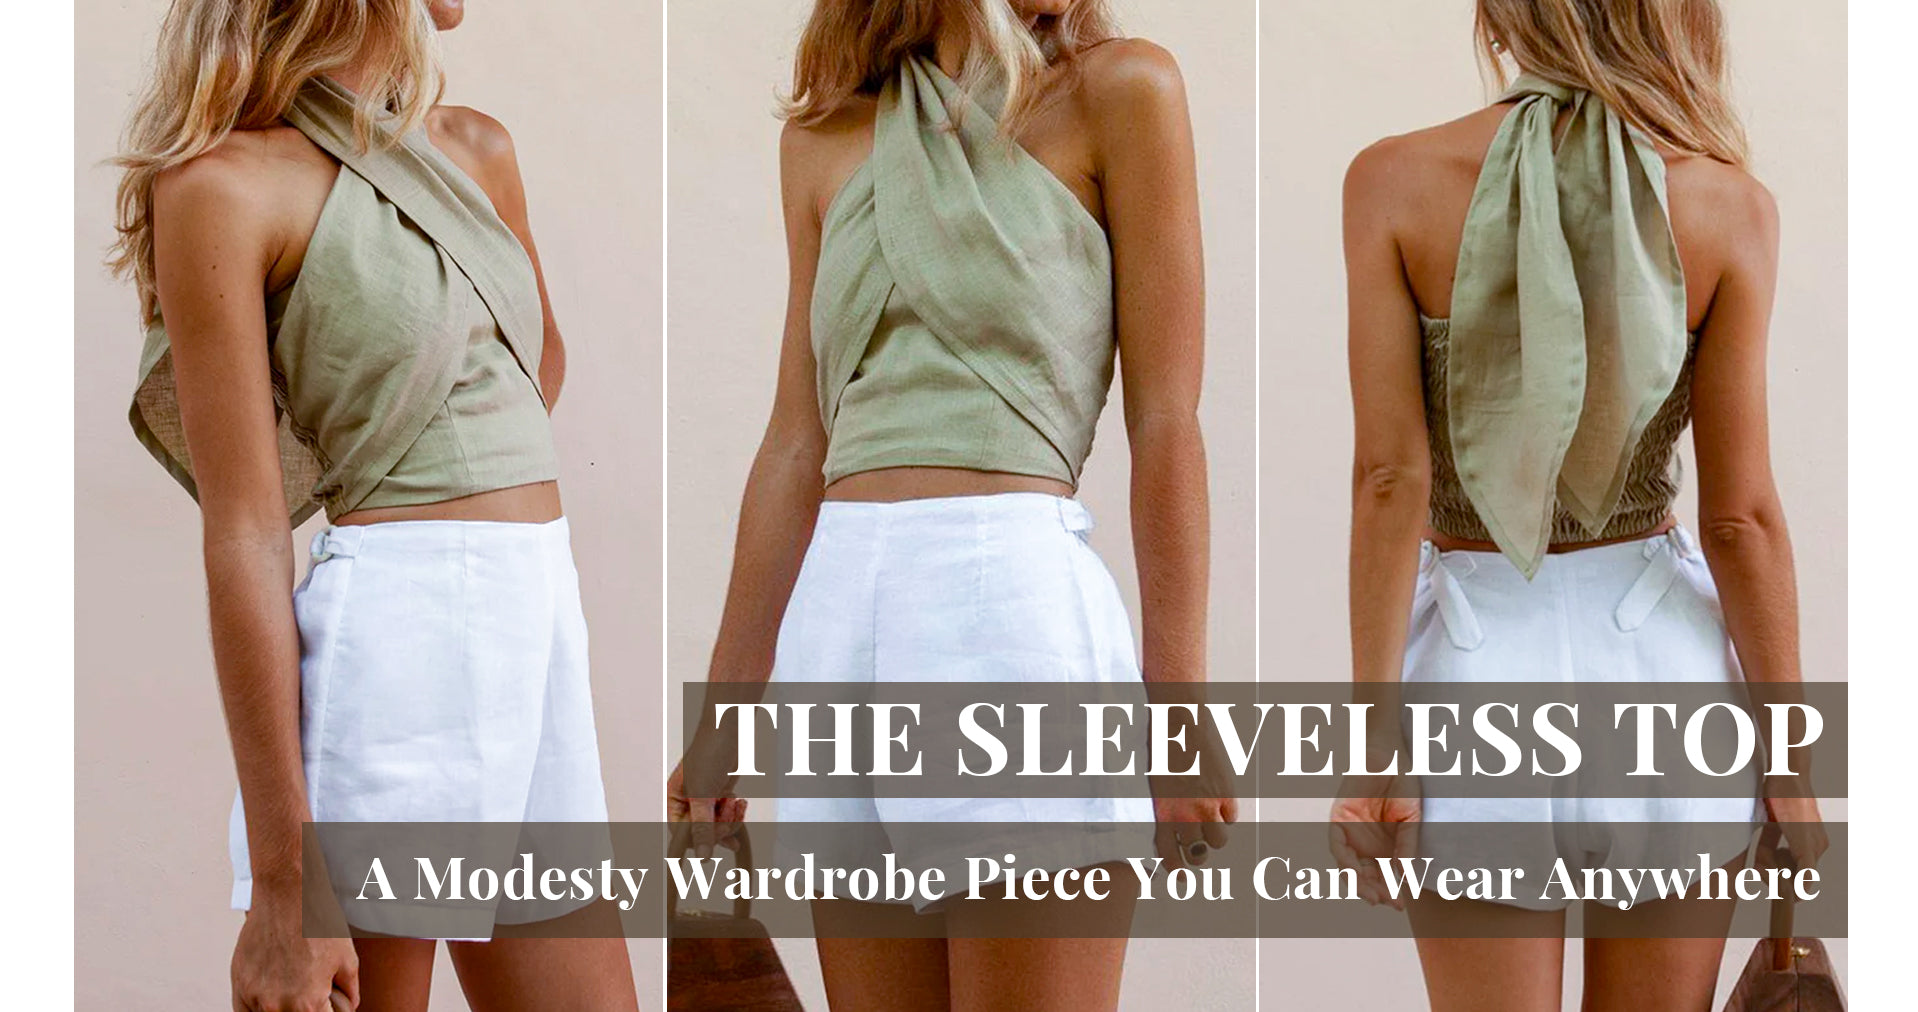 The Sleeveless Top: A Modesty Wardrobe Piece You Can Wear Anywhere